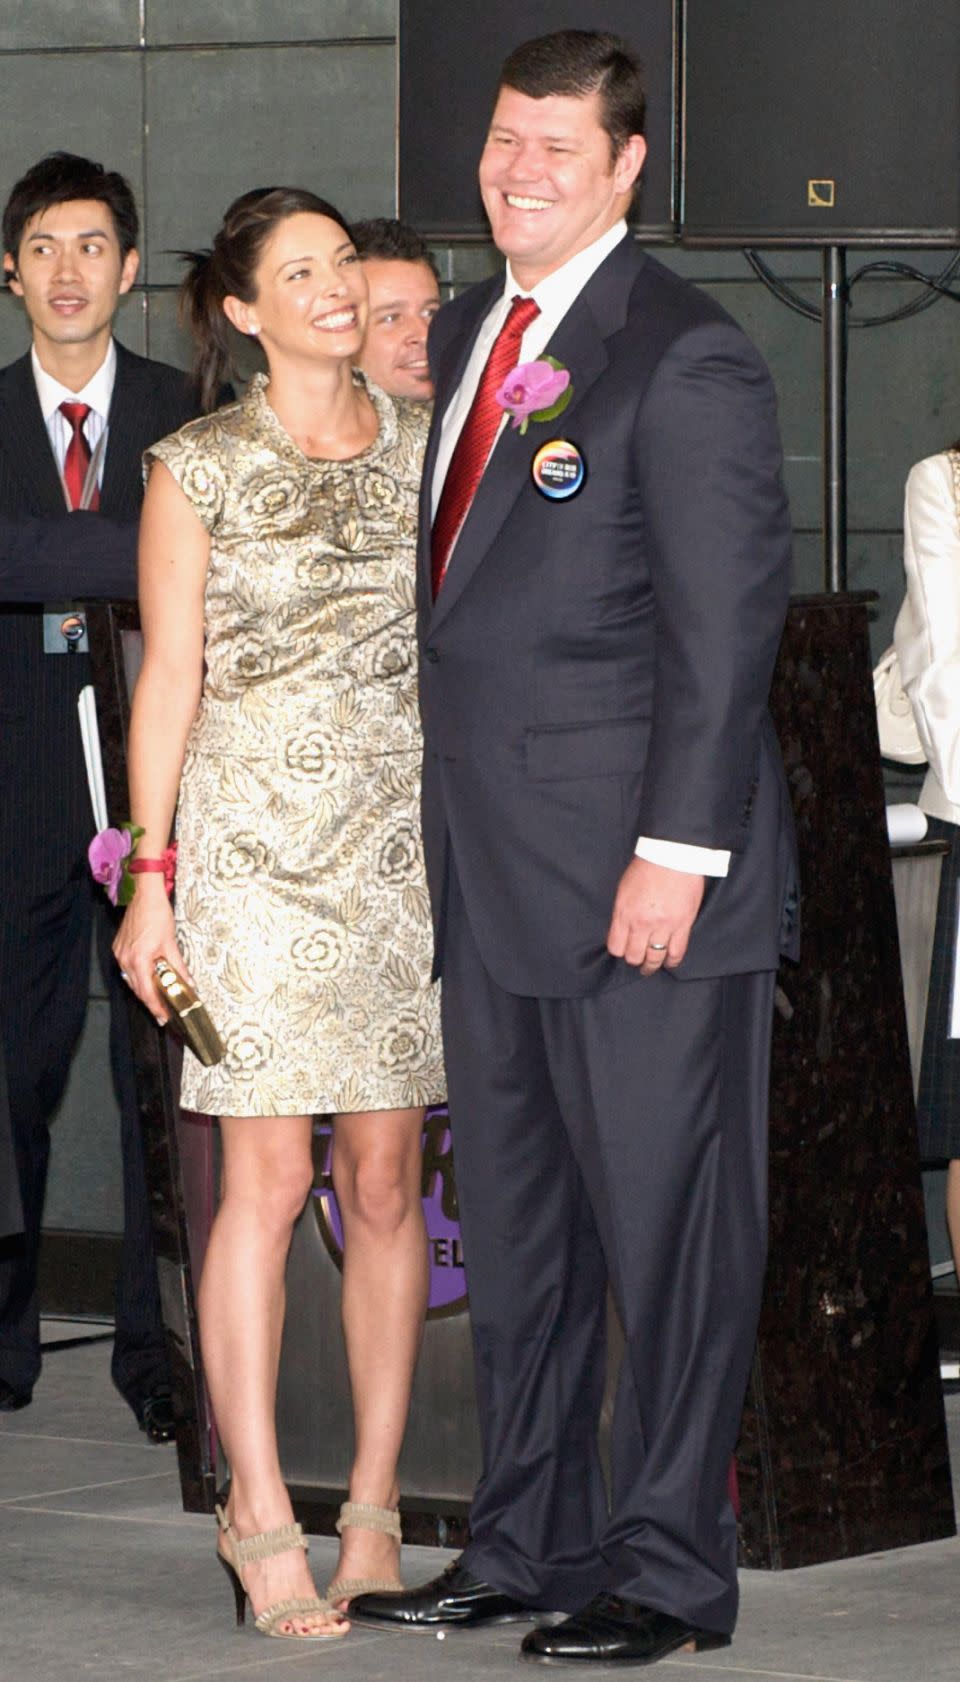 Packer split from his ex-wife Erica in 2013. Photo: Getty